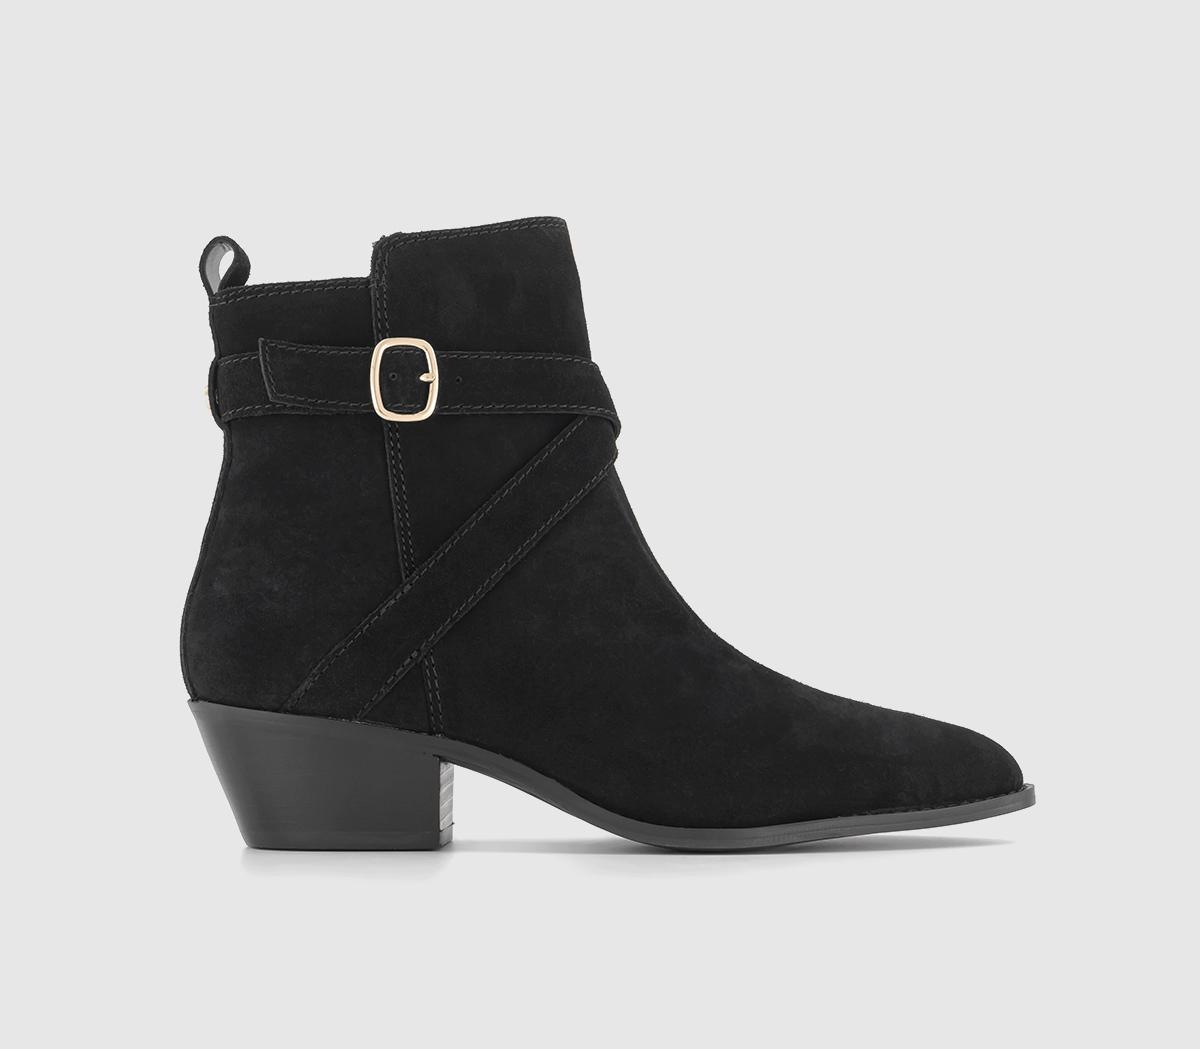 OFFICEArcade Strap Detail Pointed Toe Ankle BootsBlack Suede